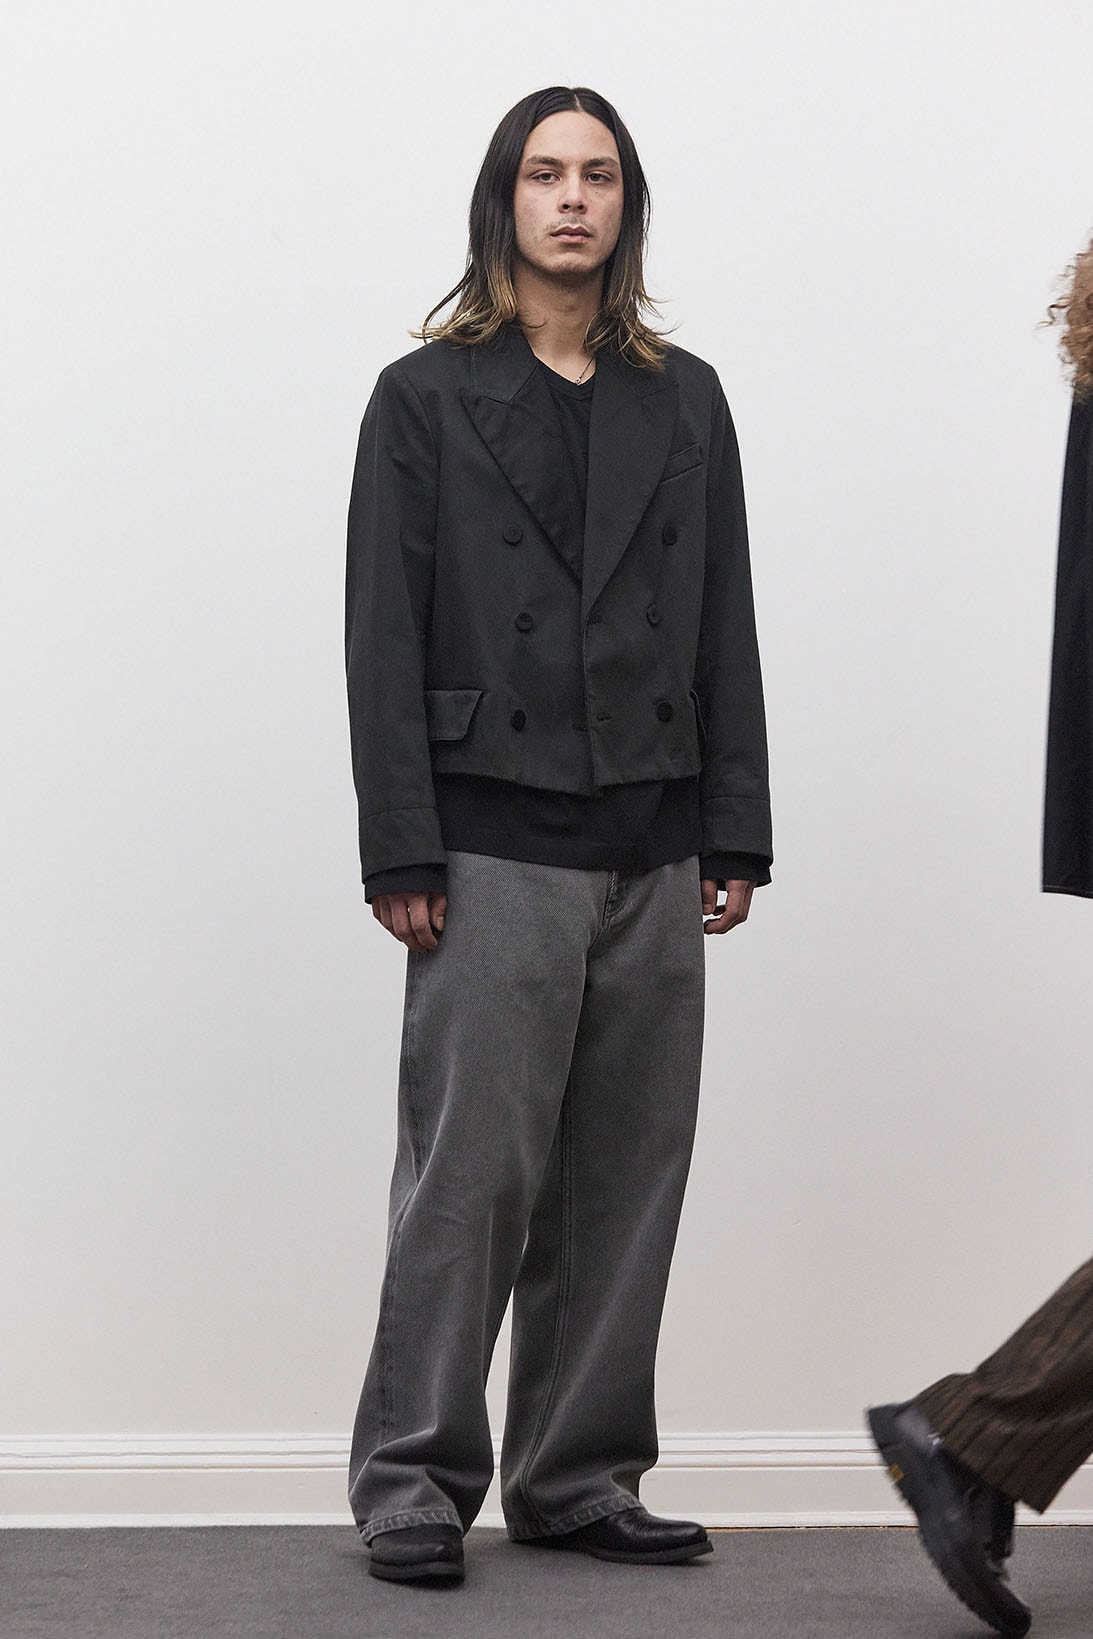 Our Legacy Fall 2018 "Circles" Collection Martine Rose Tailoring